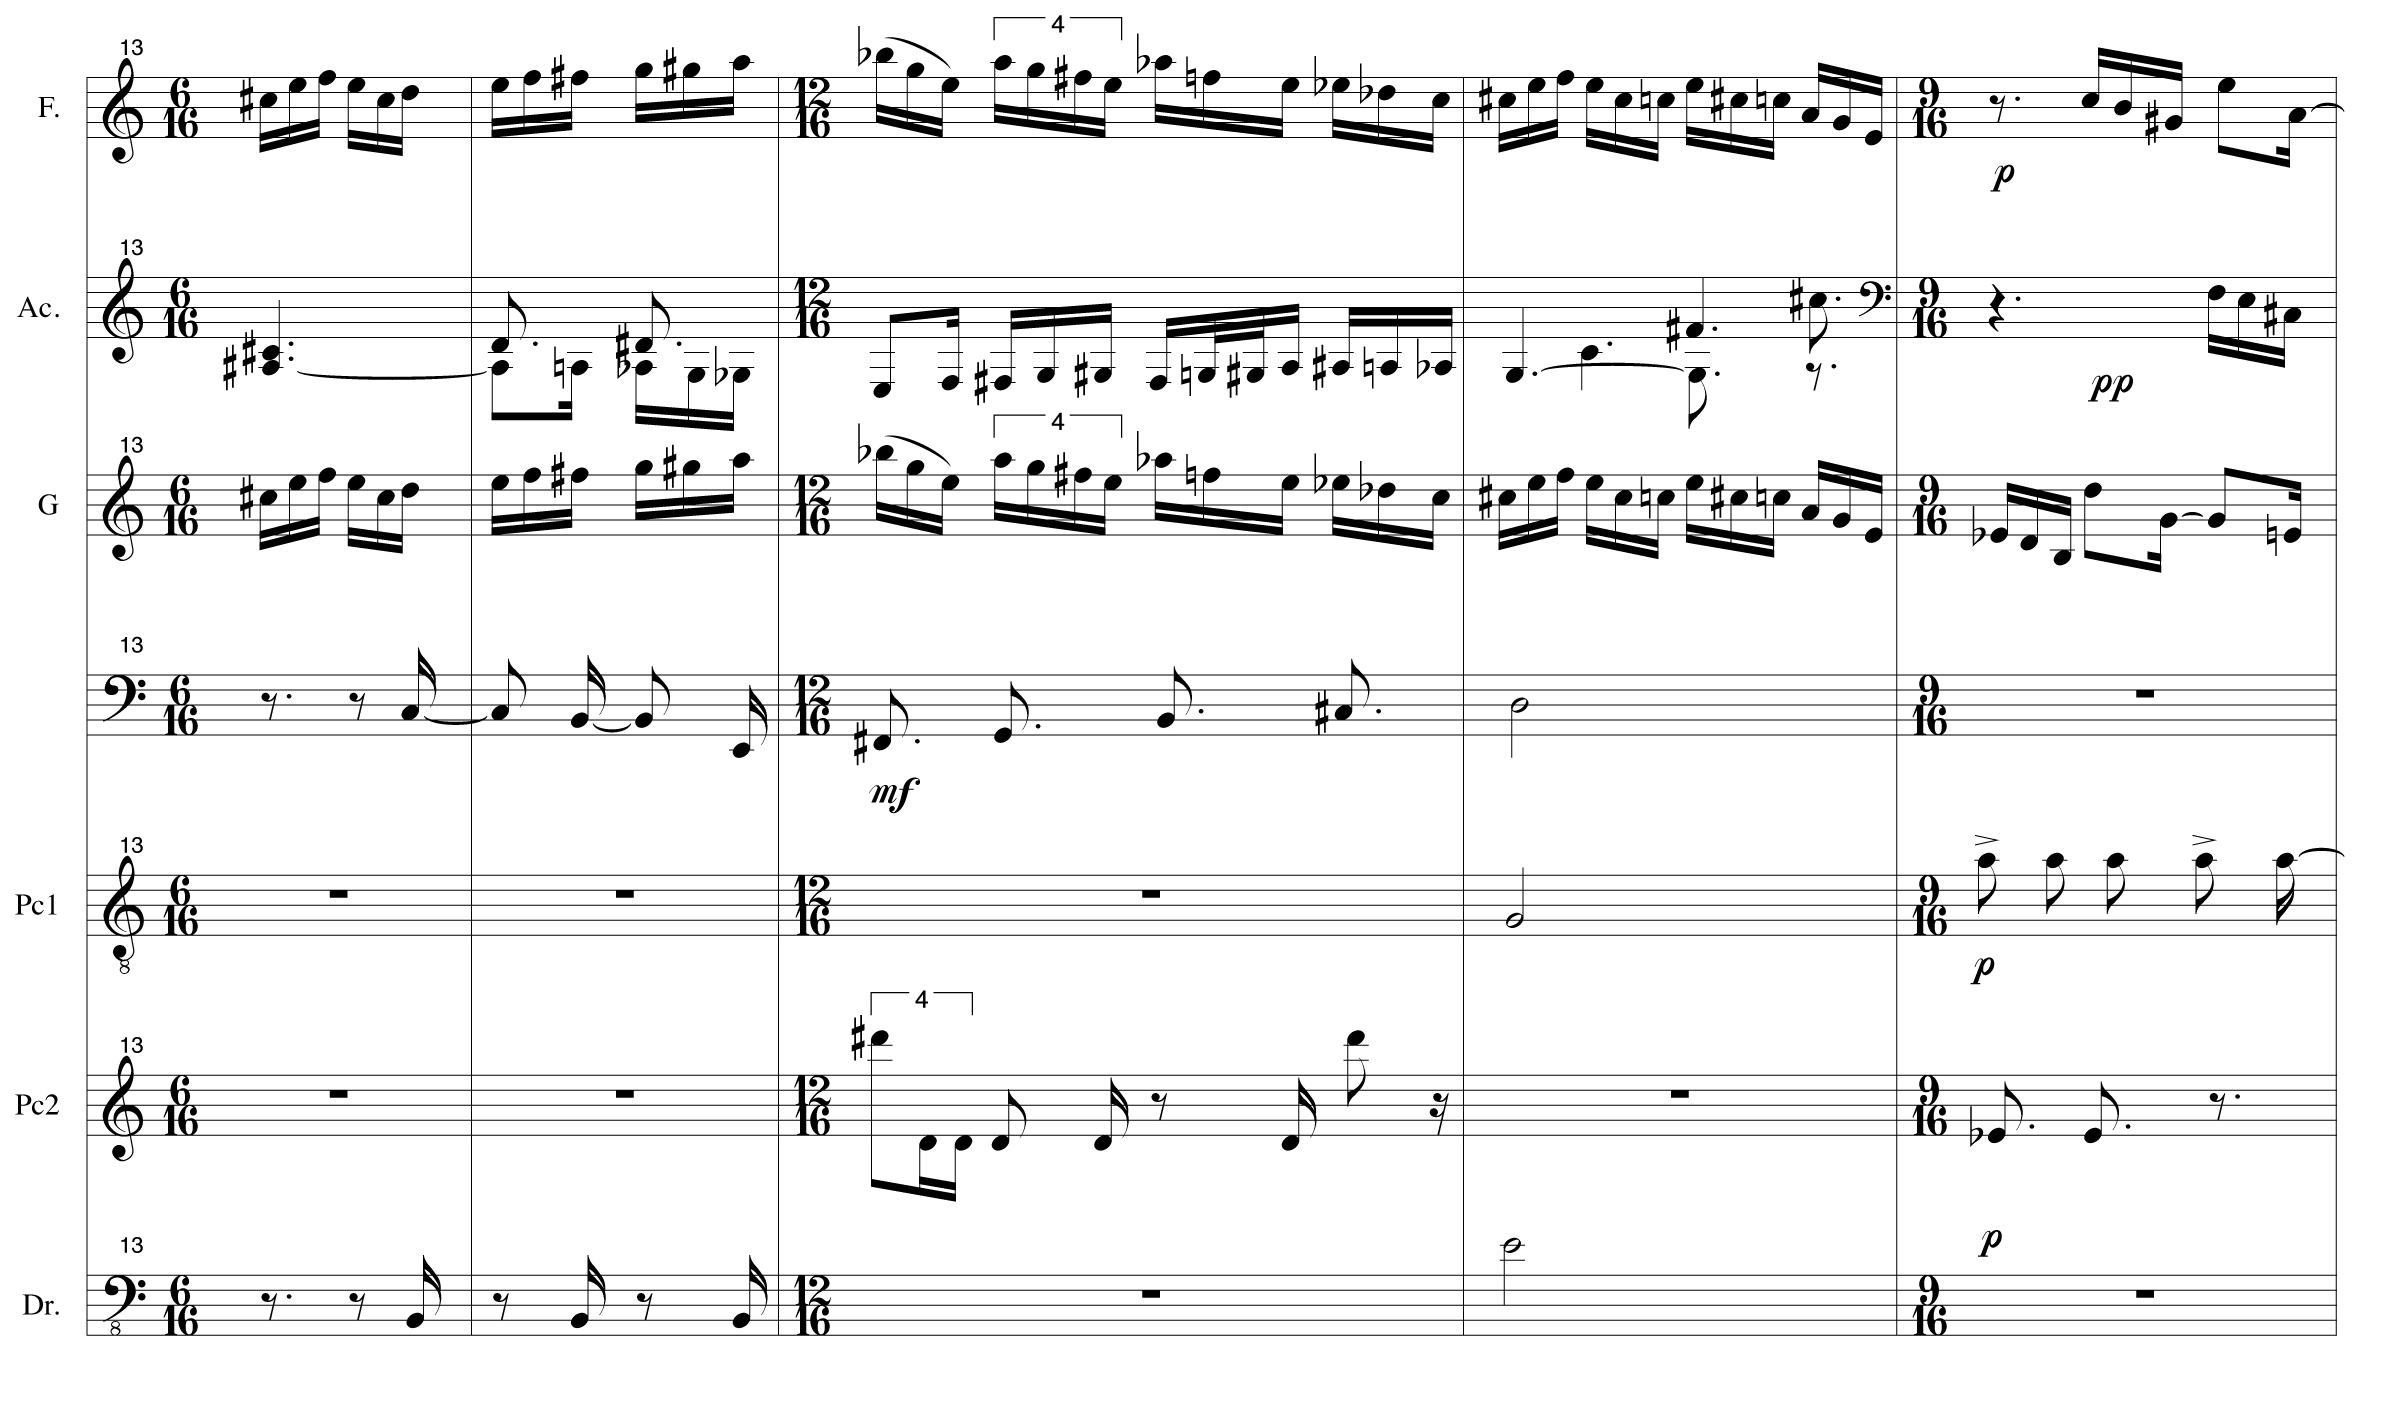 An excerpt from Mike Johnson's musical score for the instrumental composition 